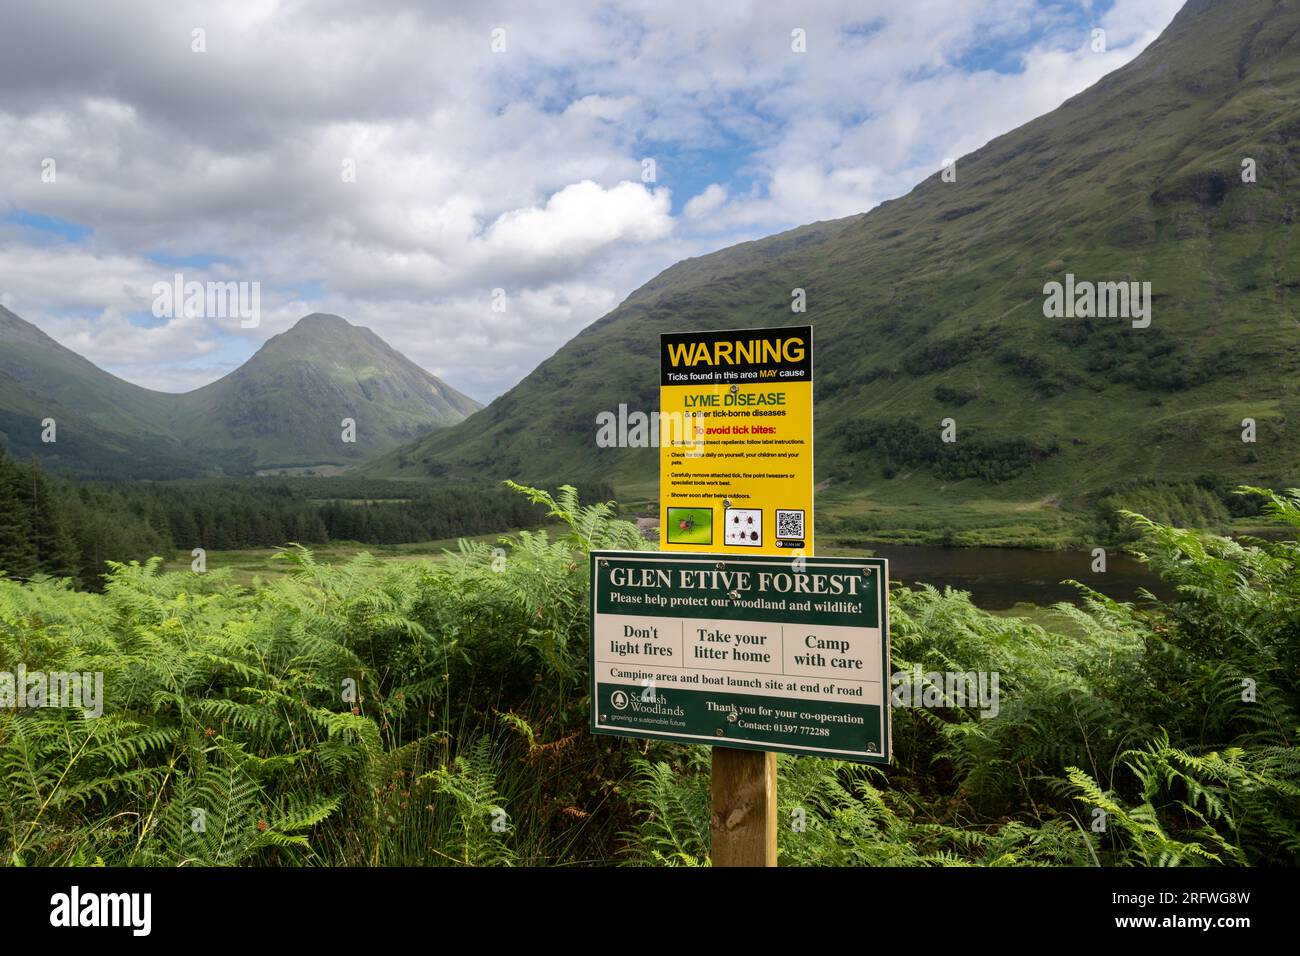 Warning on a sign on a Scottish Estate about the dangers of Lyme Disease which can be picked up off ticks. Glen Etive, Scotland. Stock Photo